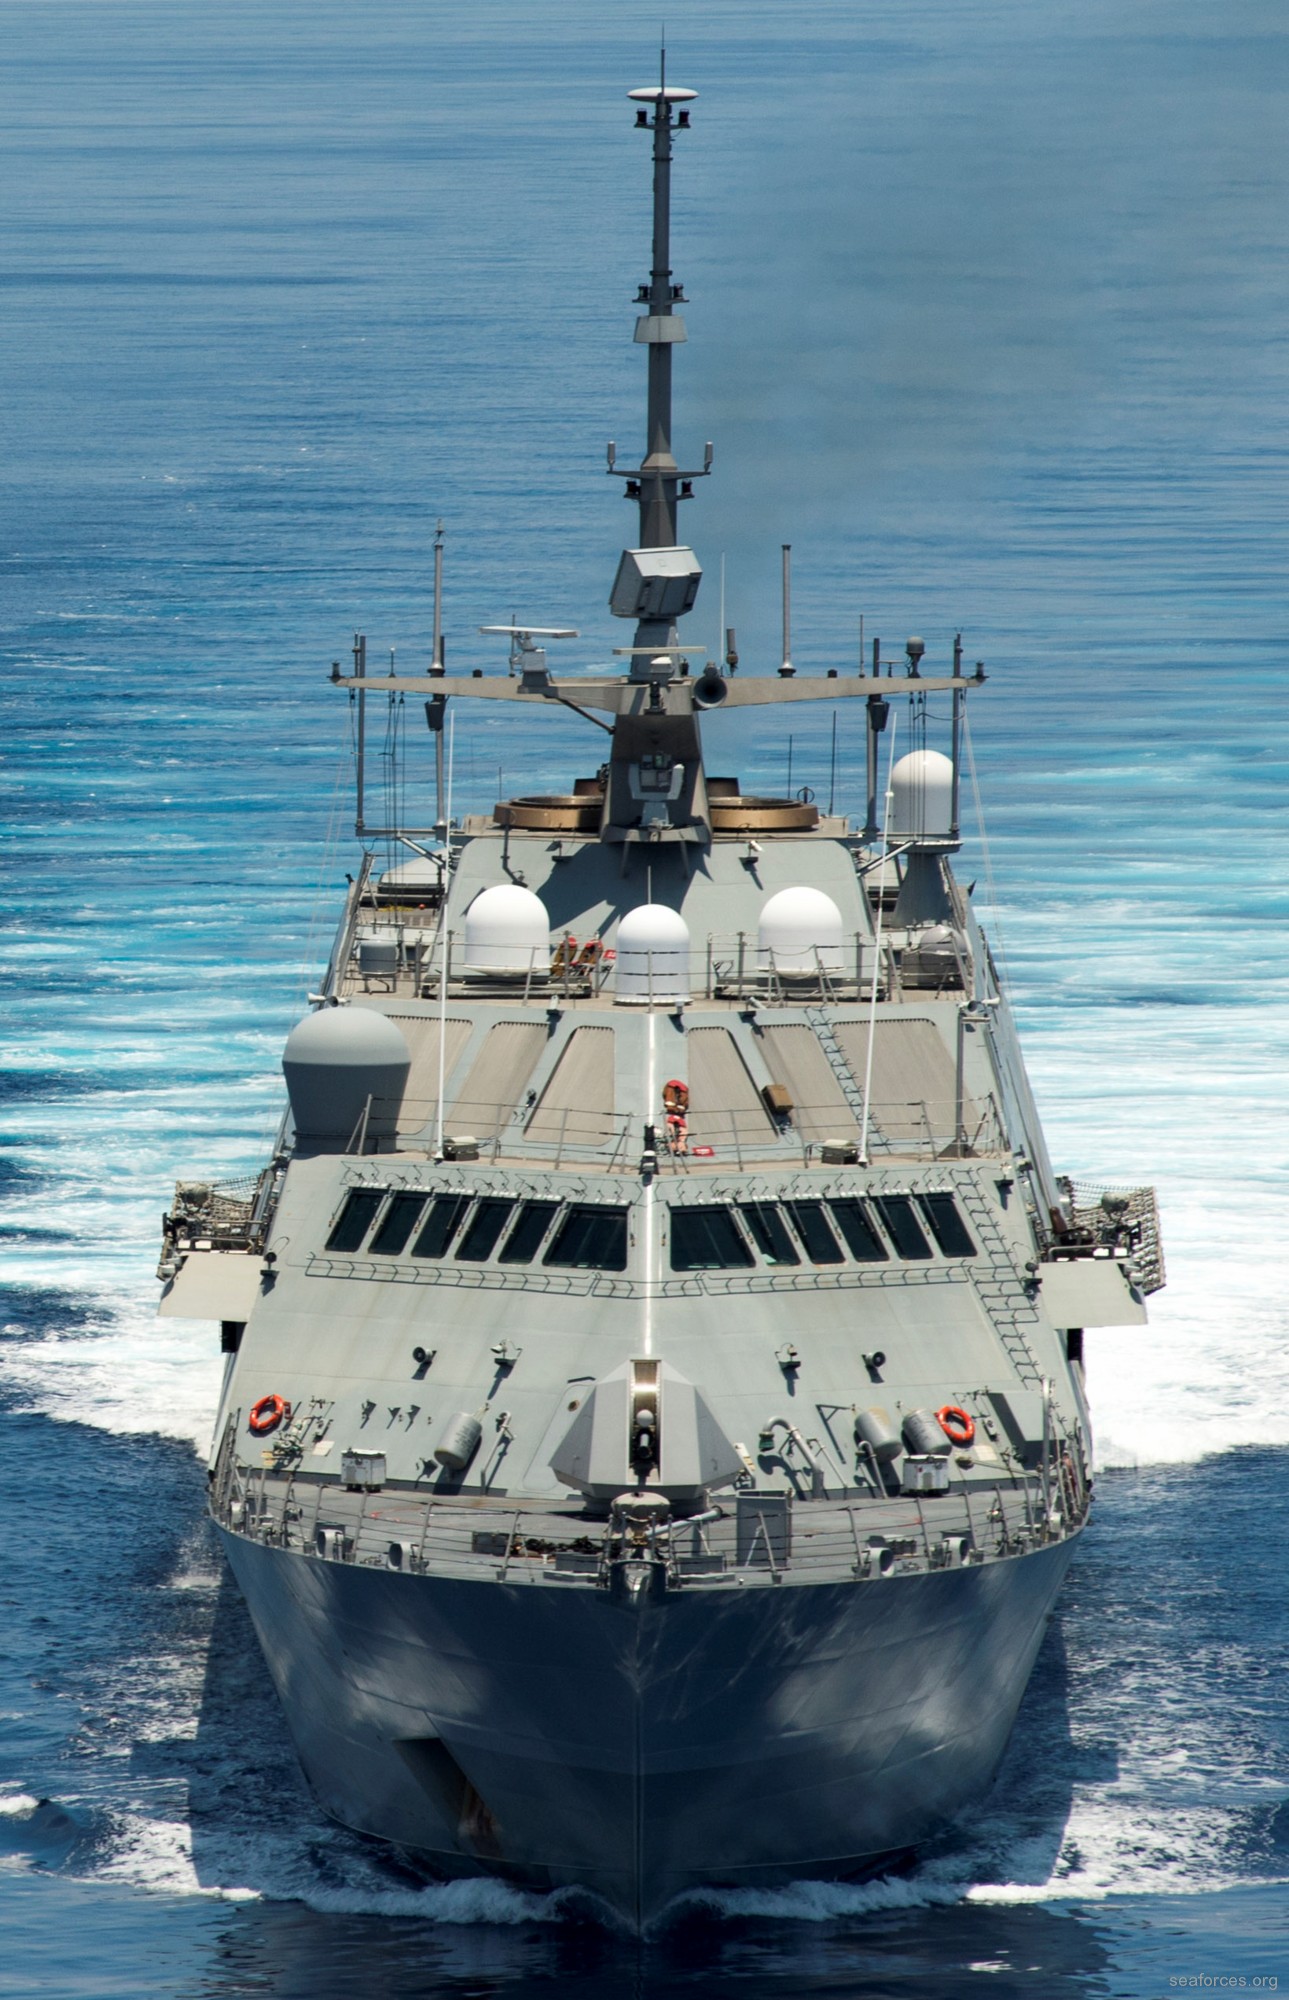 lcs-3 uss fort worth littoral combat ship freedom class us navy 09